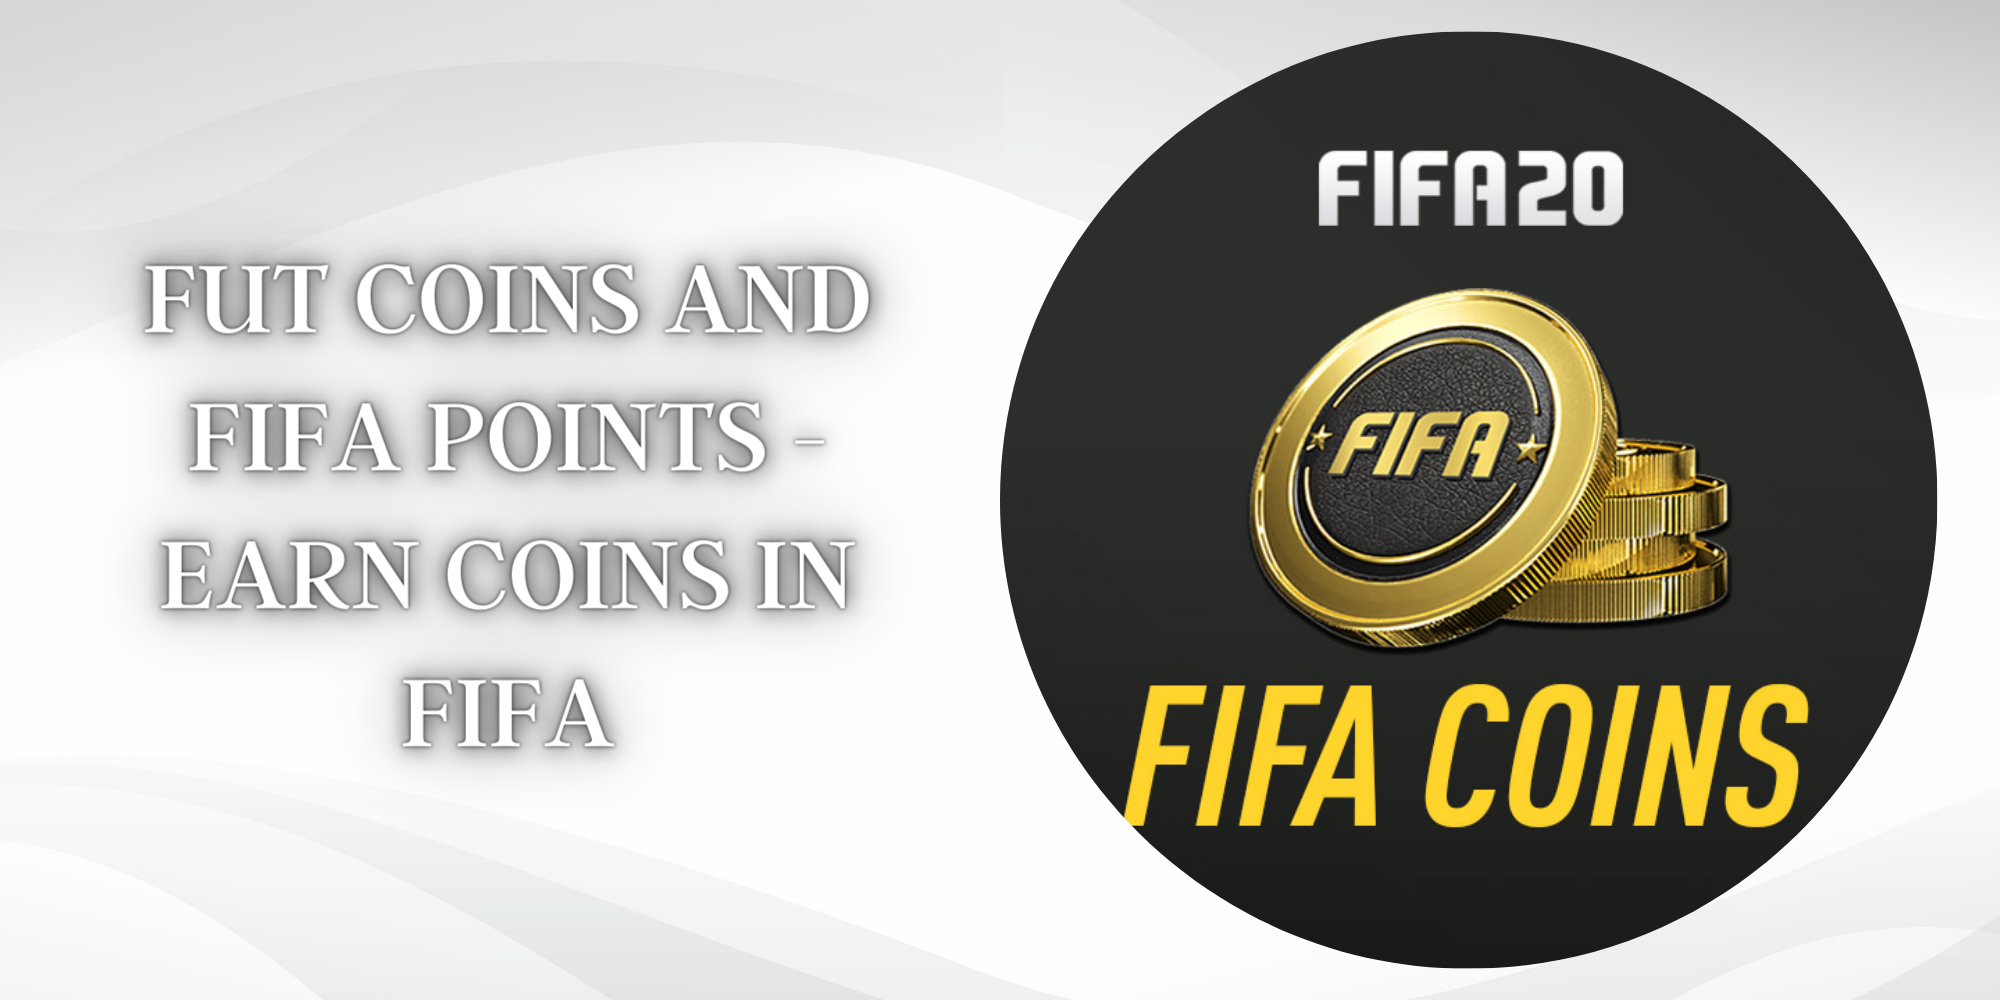 FUT Coins and FIFA Points - How to Earn Coins Fast in FIFA